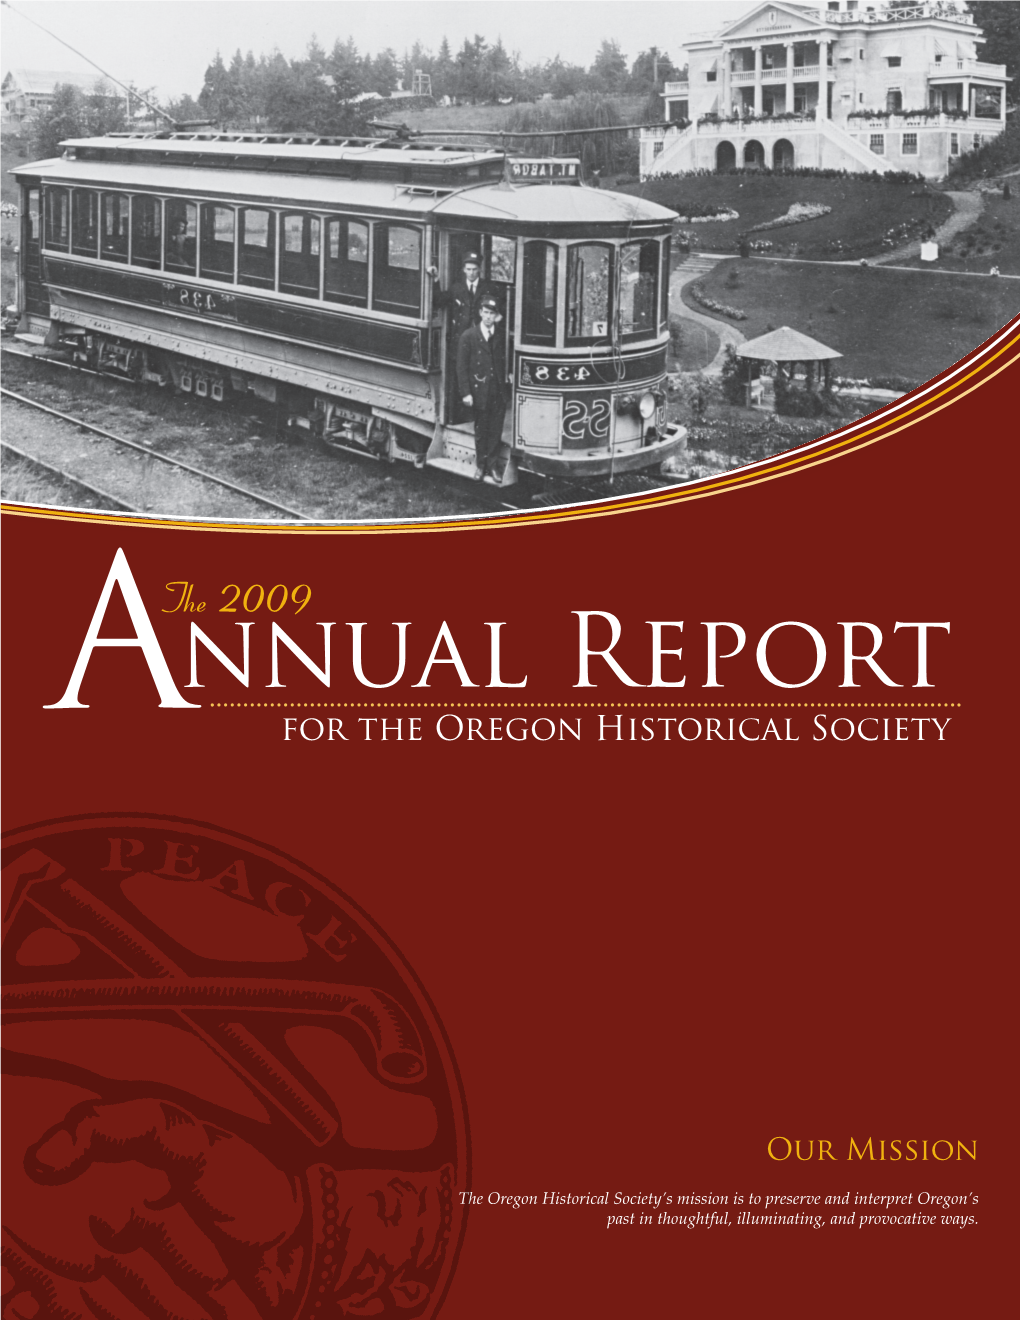 Nnual Report a for the Oregon Historical Society